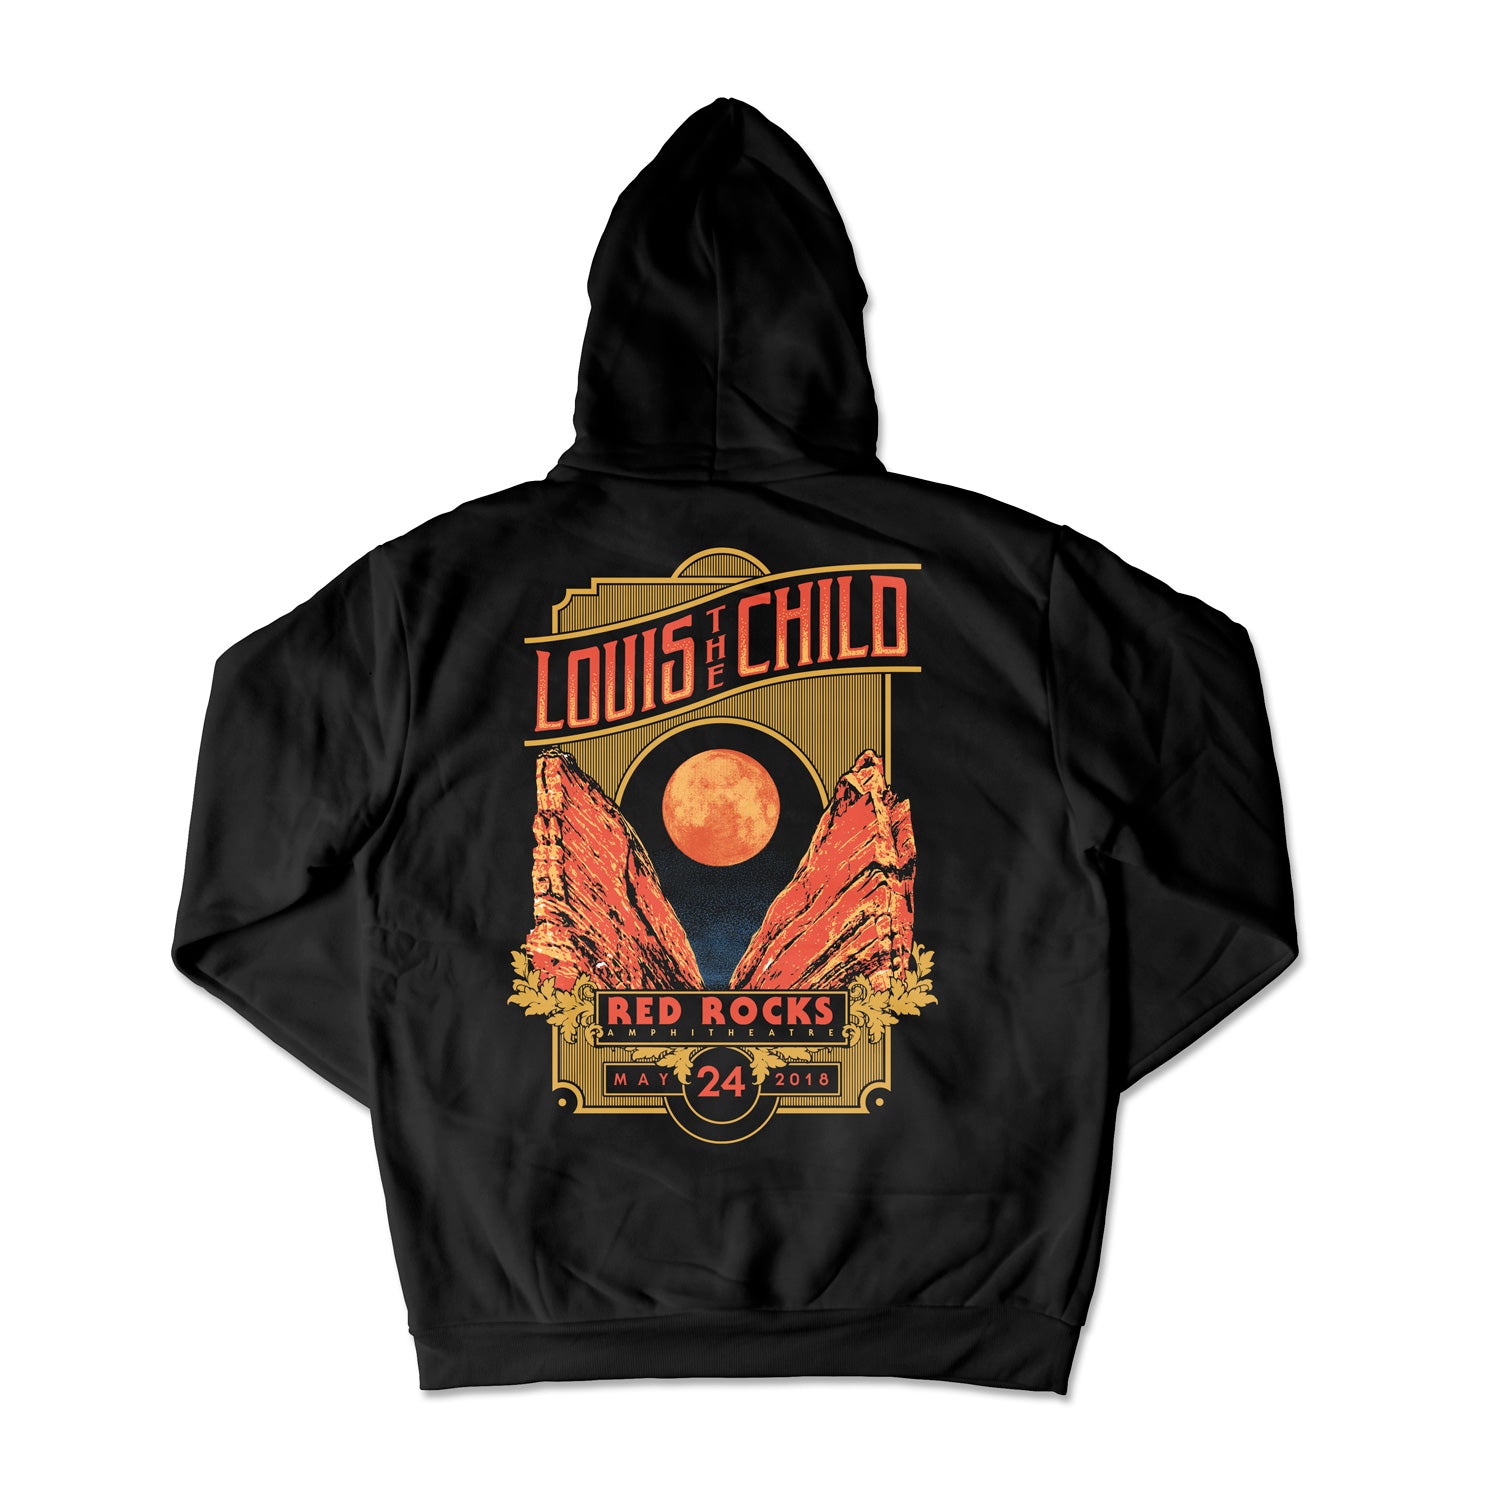 Official Merch - Louis the Child